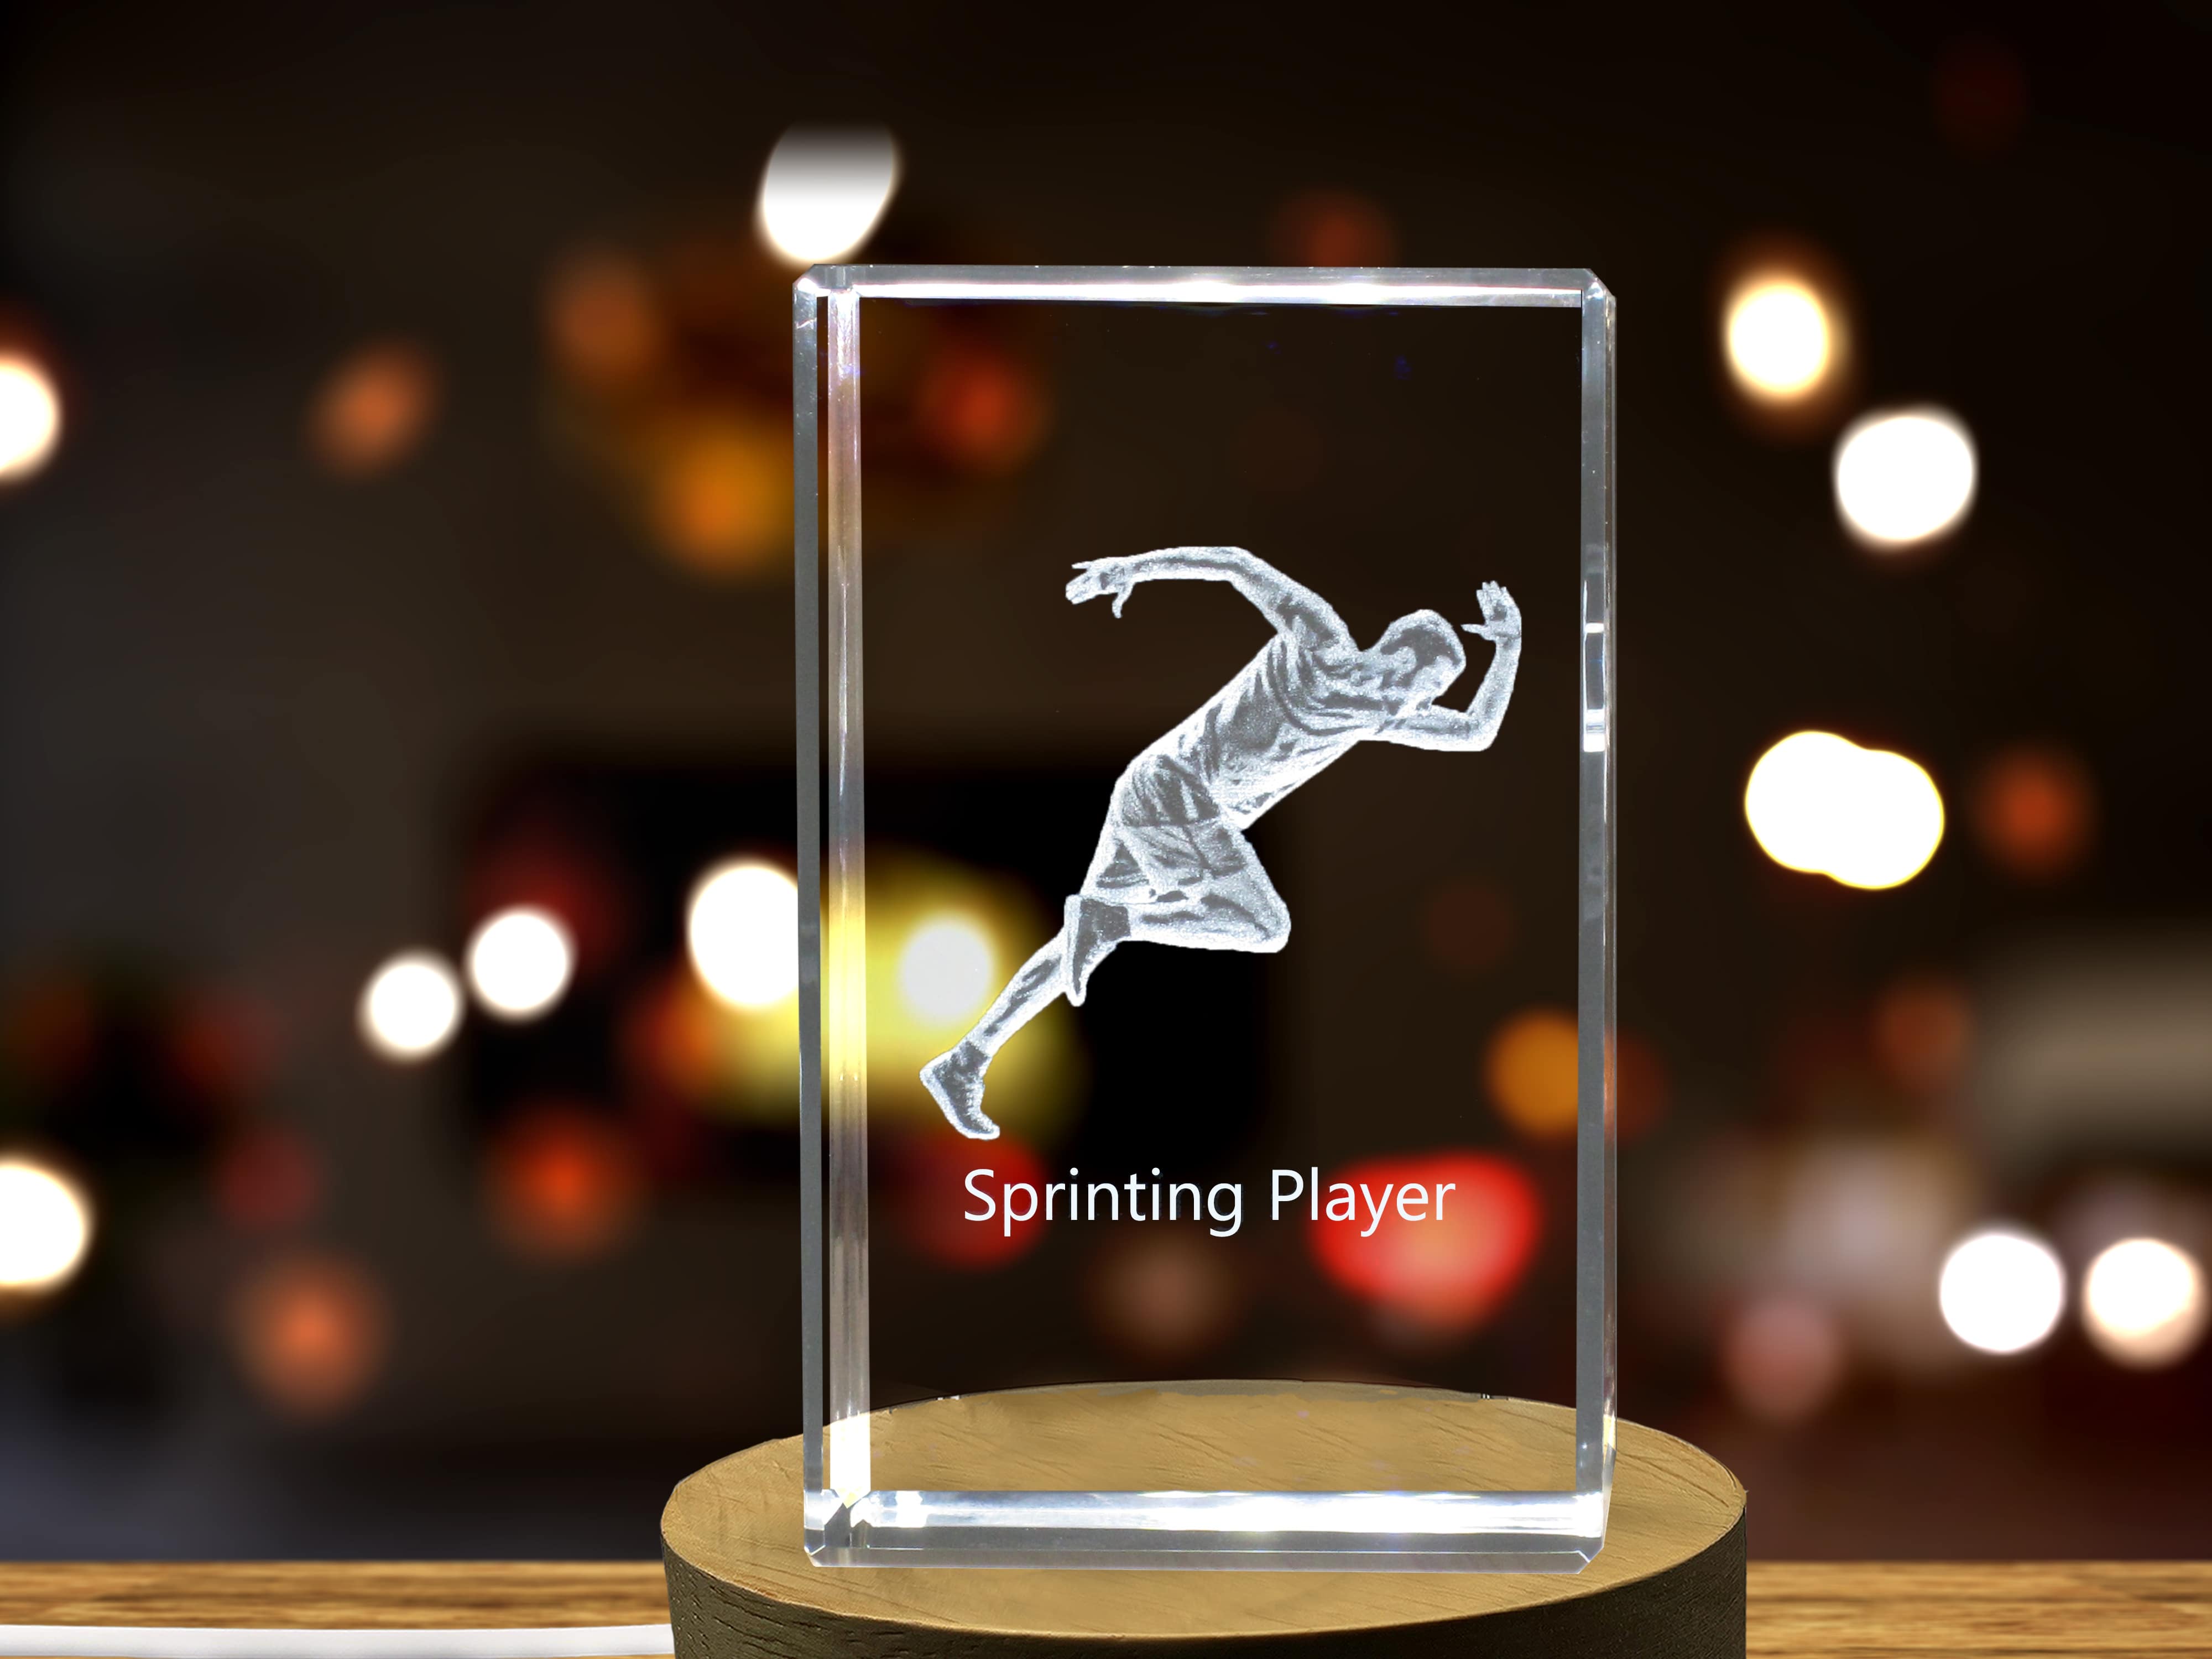 Sprint Running Player 3D Engraved Crystal 3D Engraved Crystal Keepsake/Gift/Decor/Collectible/Souvenir A&B Crystal Collection